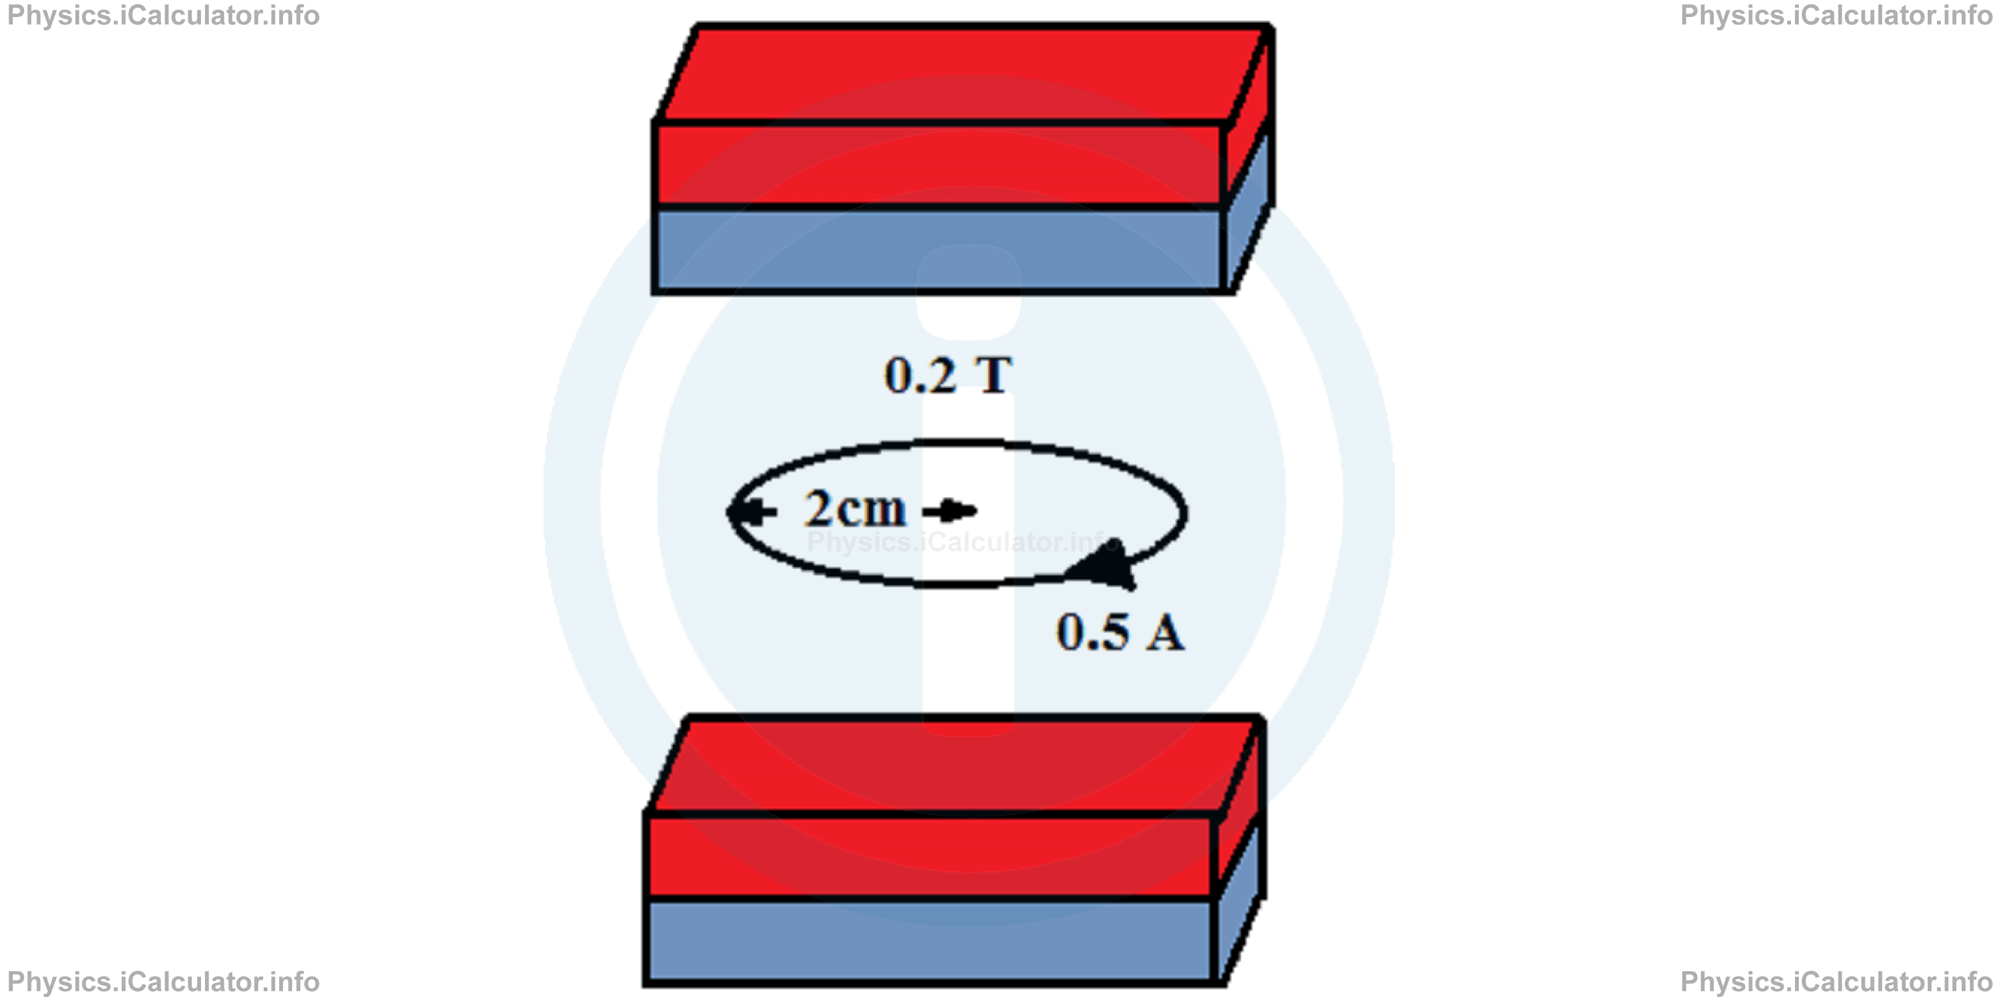 Physics Tutorials: This image provides visual information for the physics tutorial Magnetic Dipole Moment 